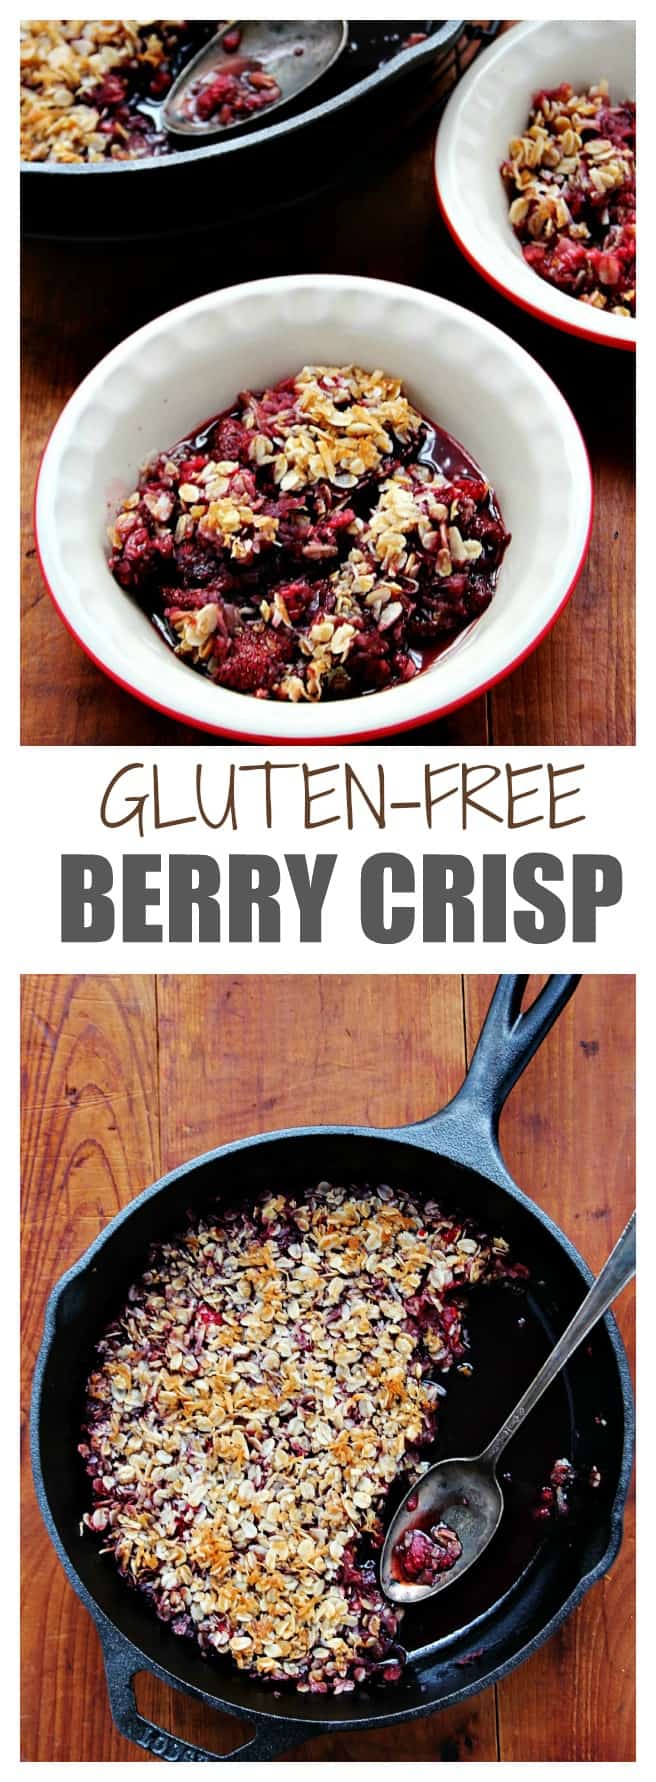 Gluten Free Berry Crisp super easy and delicious dessert baked in a skillet. The coconut oat topping is crazy good crunchycreamysweet.com  Gluten Free Berry Crisp